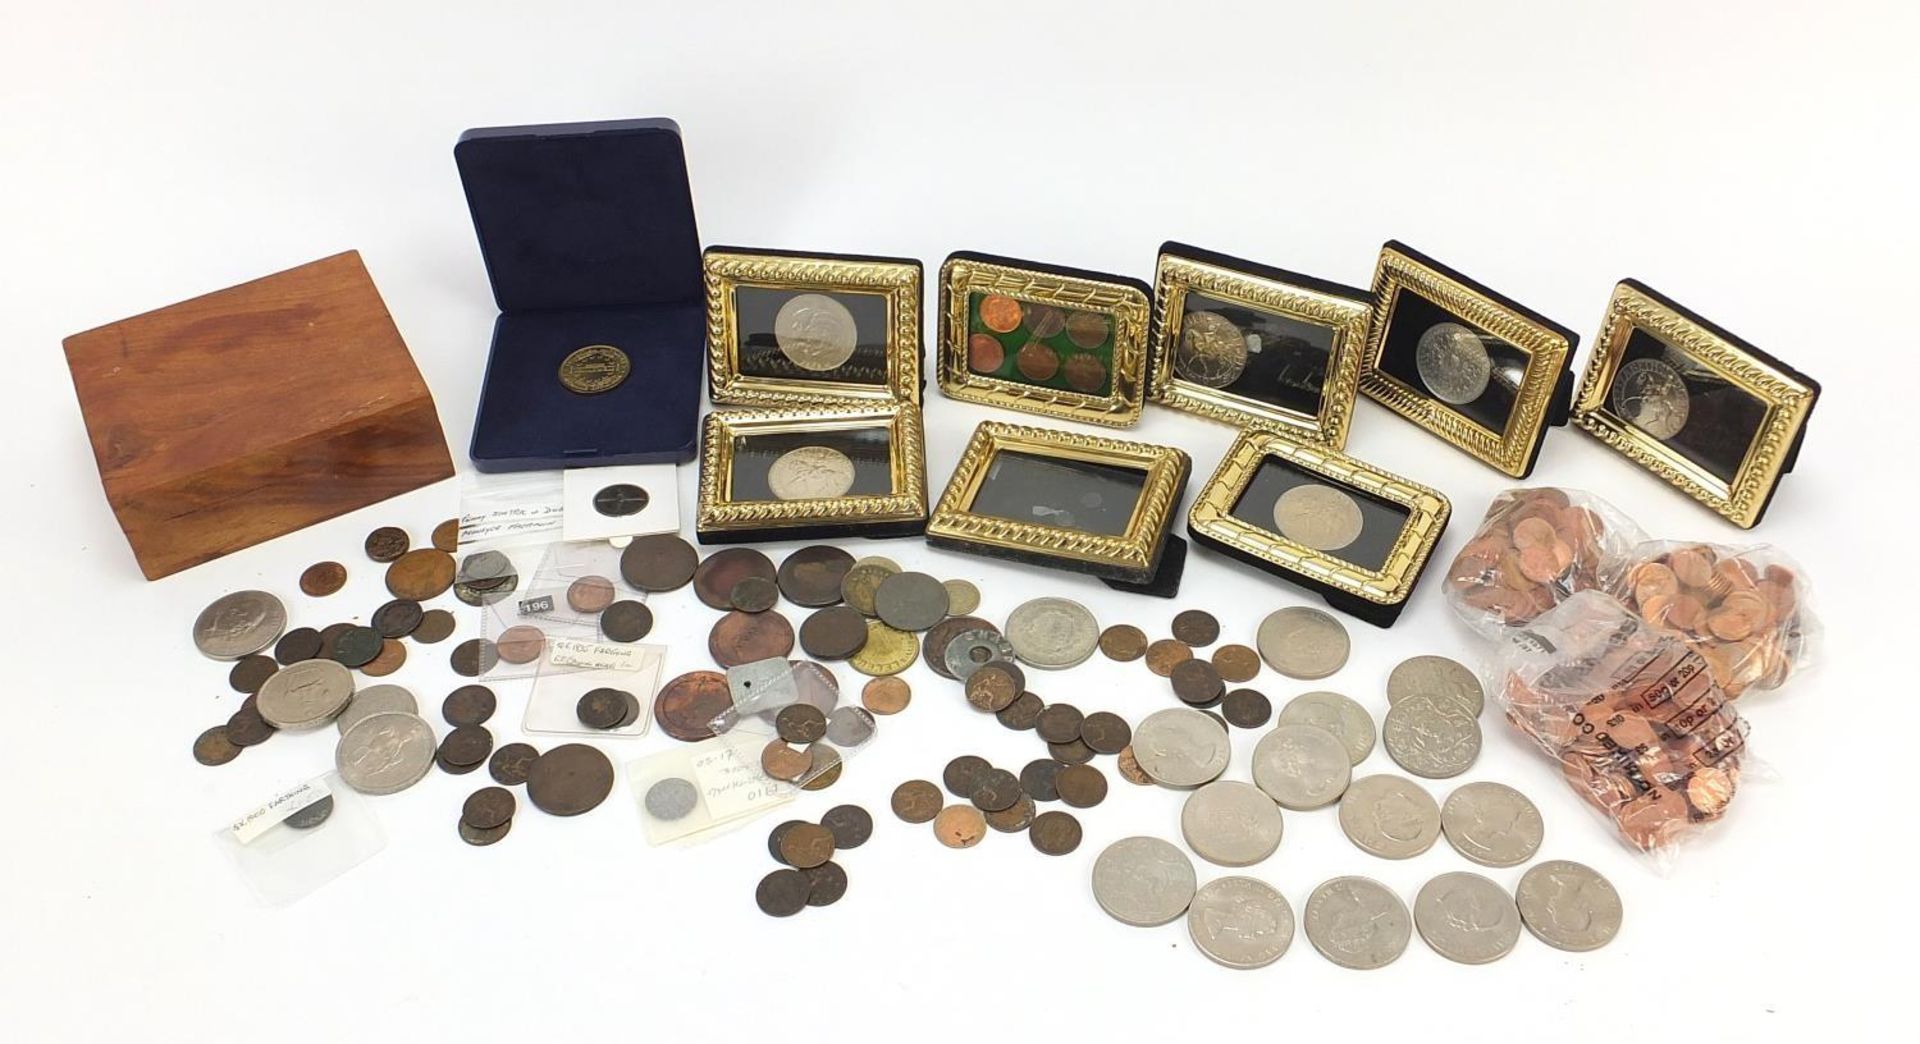 Antique and later British and world coinage including Chinese cash coin, George II 1730 farthing and